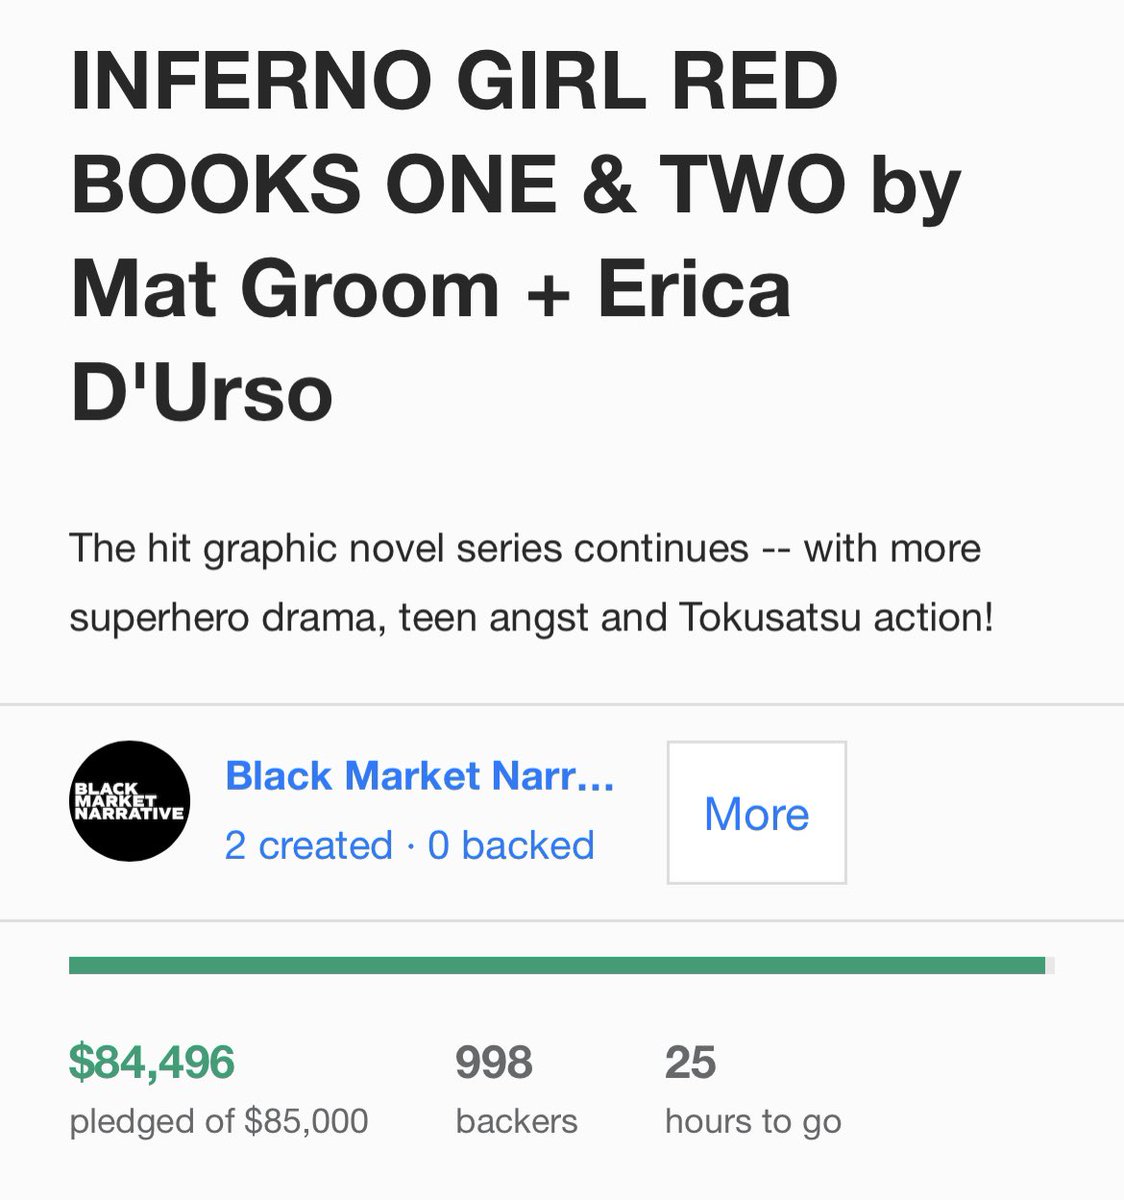 We are so close to the end. We only need to raise around $500. C’mon y’all. Let’s do this. #InfernoIgnite #InfernoGirlRed